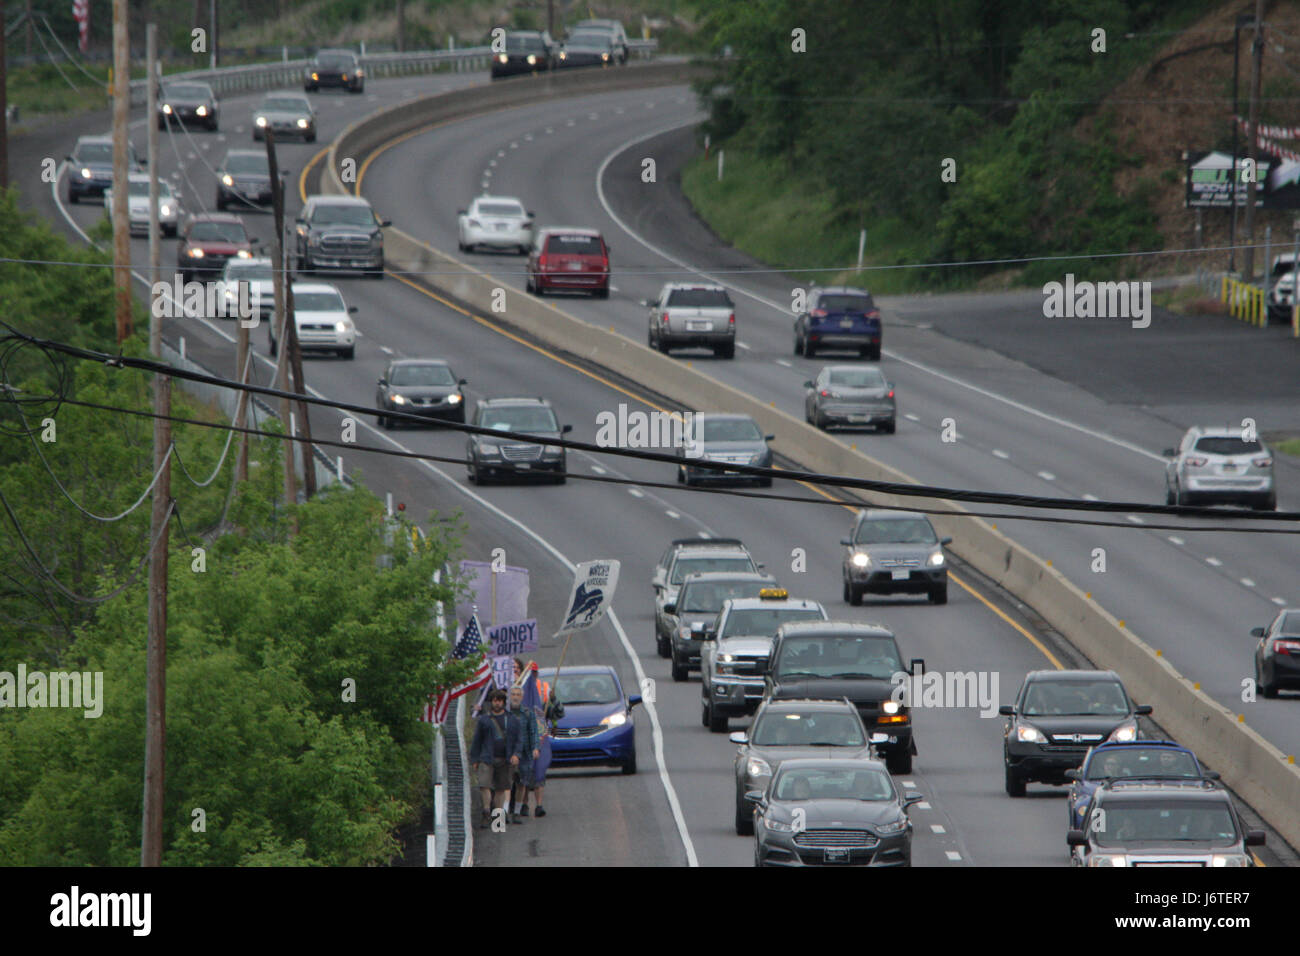 Harrisburg, PA., 21st May, 2017. A group of demonstrators, some of whom marched more than 100 miles from Philadelphia over the course of nine days, walk down the shoulder of US Route 322 near Hershey, PA, Sunday, May 21, 2017. The organizers plan on staging actions at the State Capitol building starting Monday, including planned civil disobedience. Credit: Michael Candelori/Alamy Live News Stock Photo